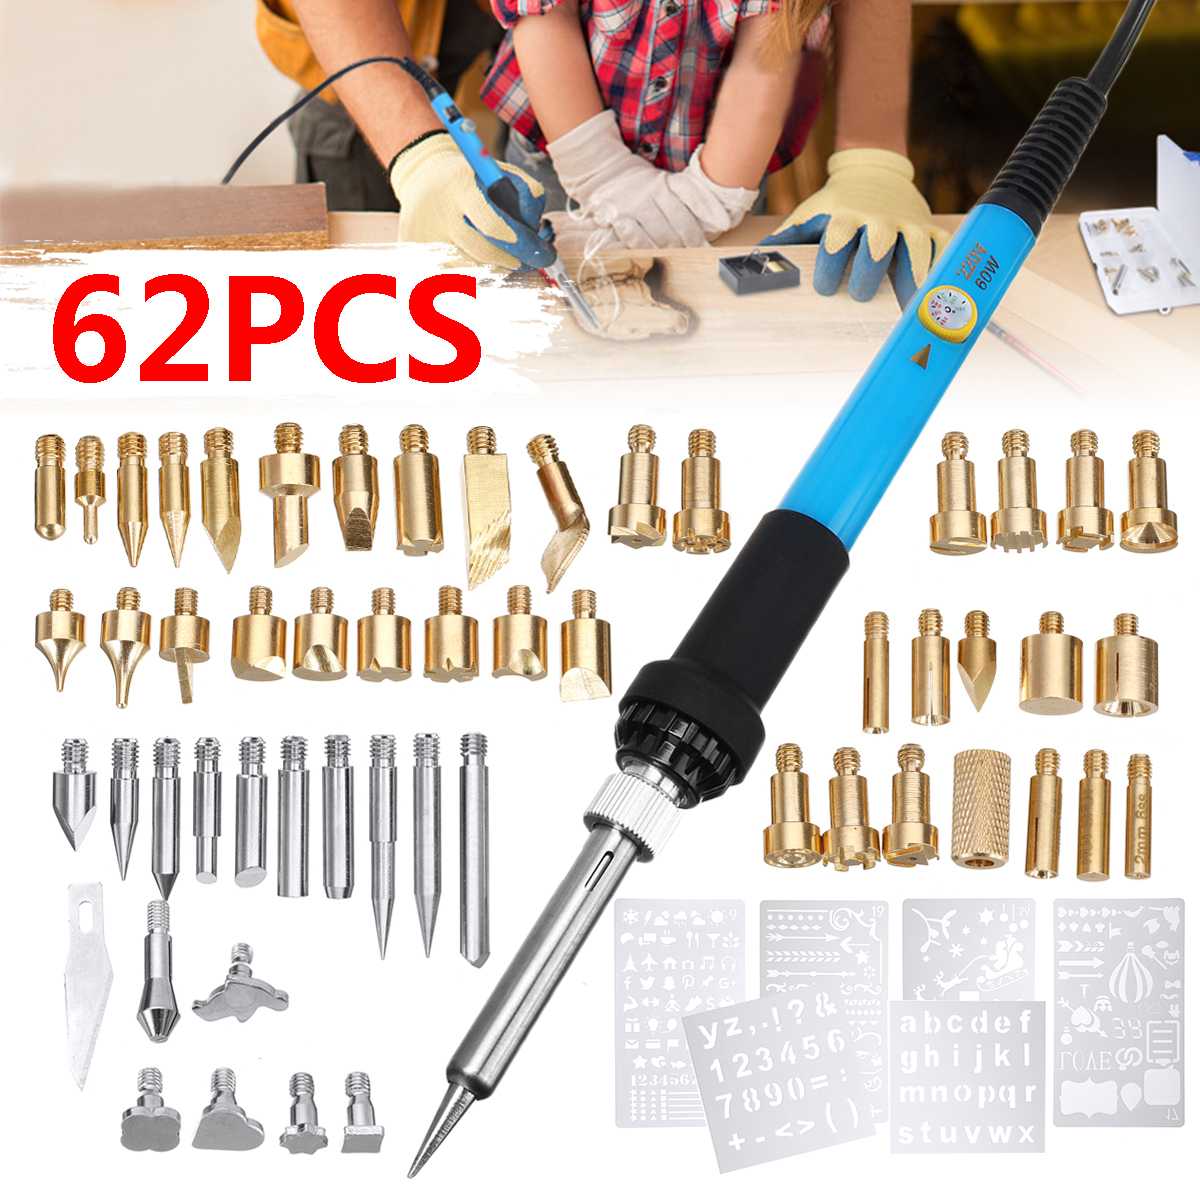 28pcs/Set Wood Burning Pen Carving Iron Pyrography Tips Stencil Soldering  Iron Burner Working Carving Craft Tool for Woodworking - AliExpress